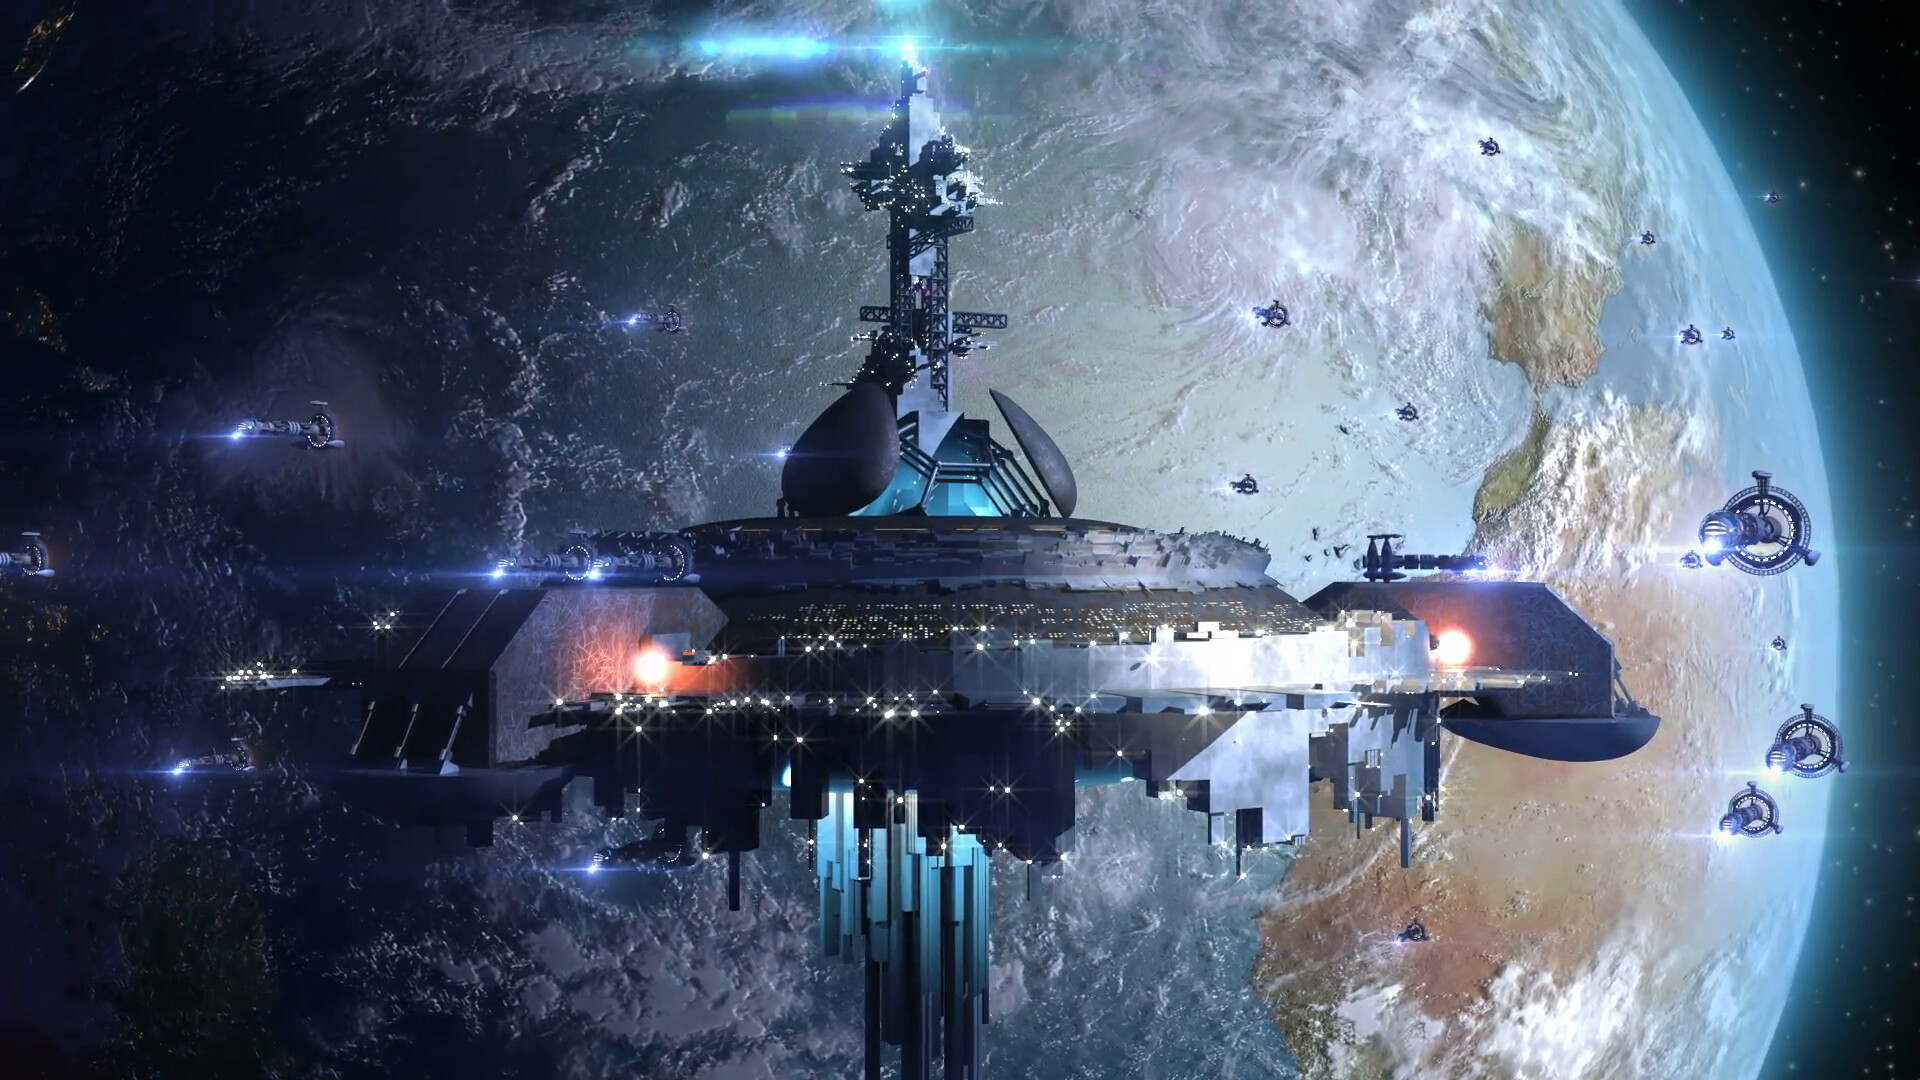 Space Station: Alien mothership, A large manned artificial satellite. Sci-fi. 1920x1080 Full HD Wallpaper.